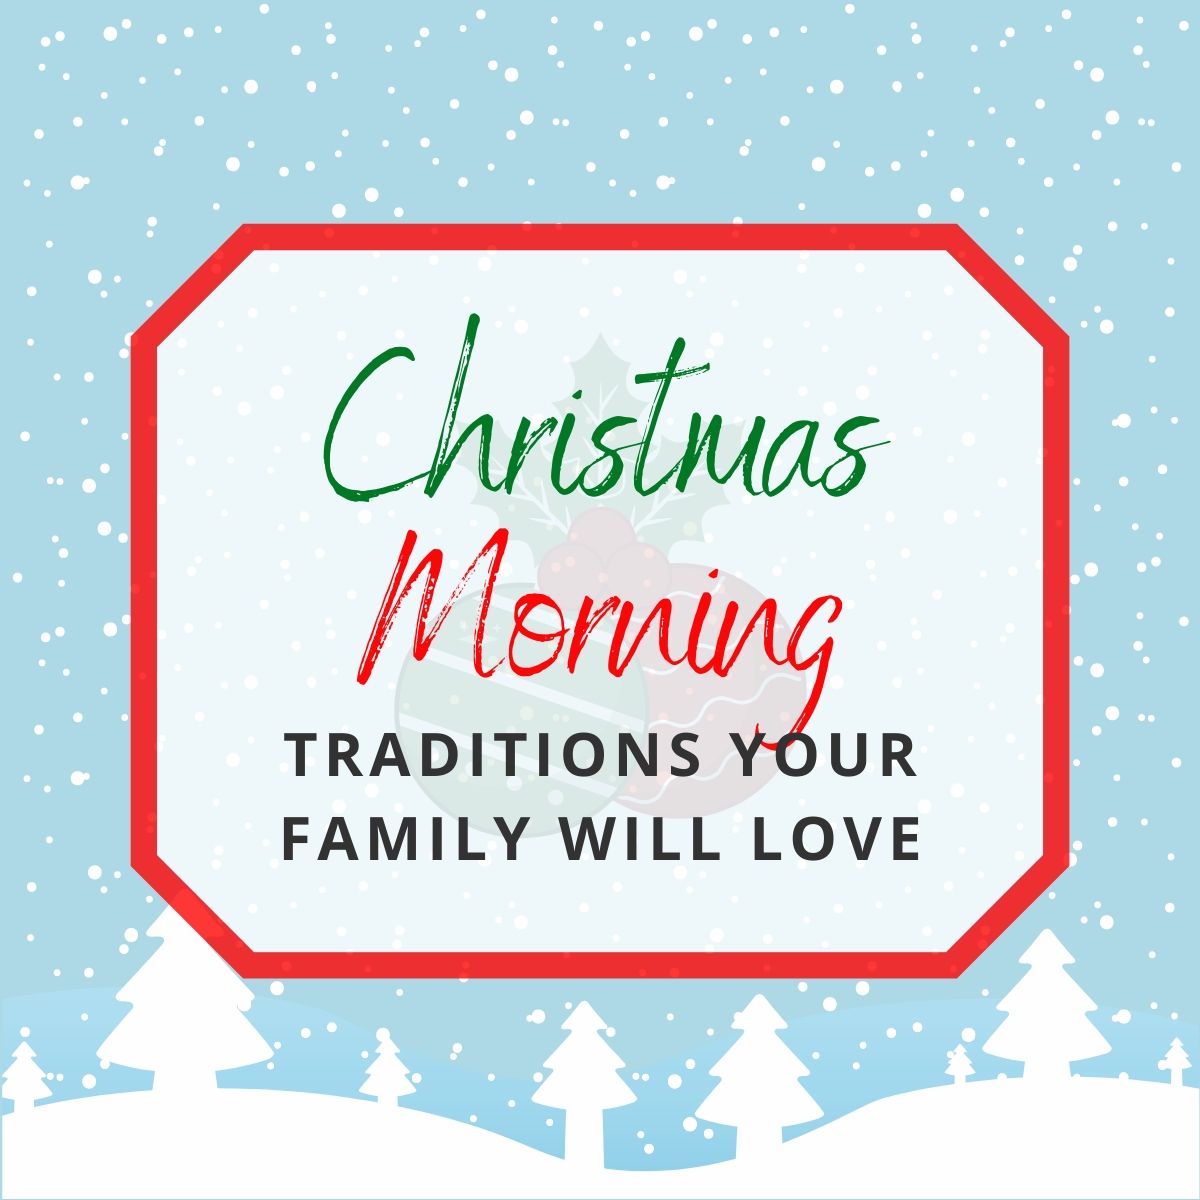 Christmas morning traditions your family will love.